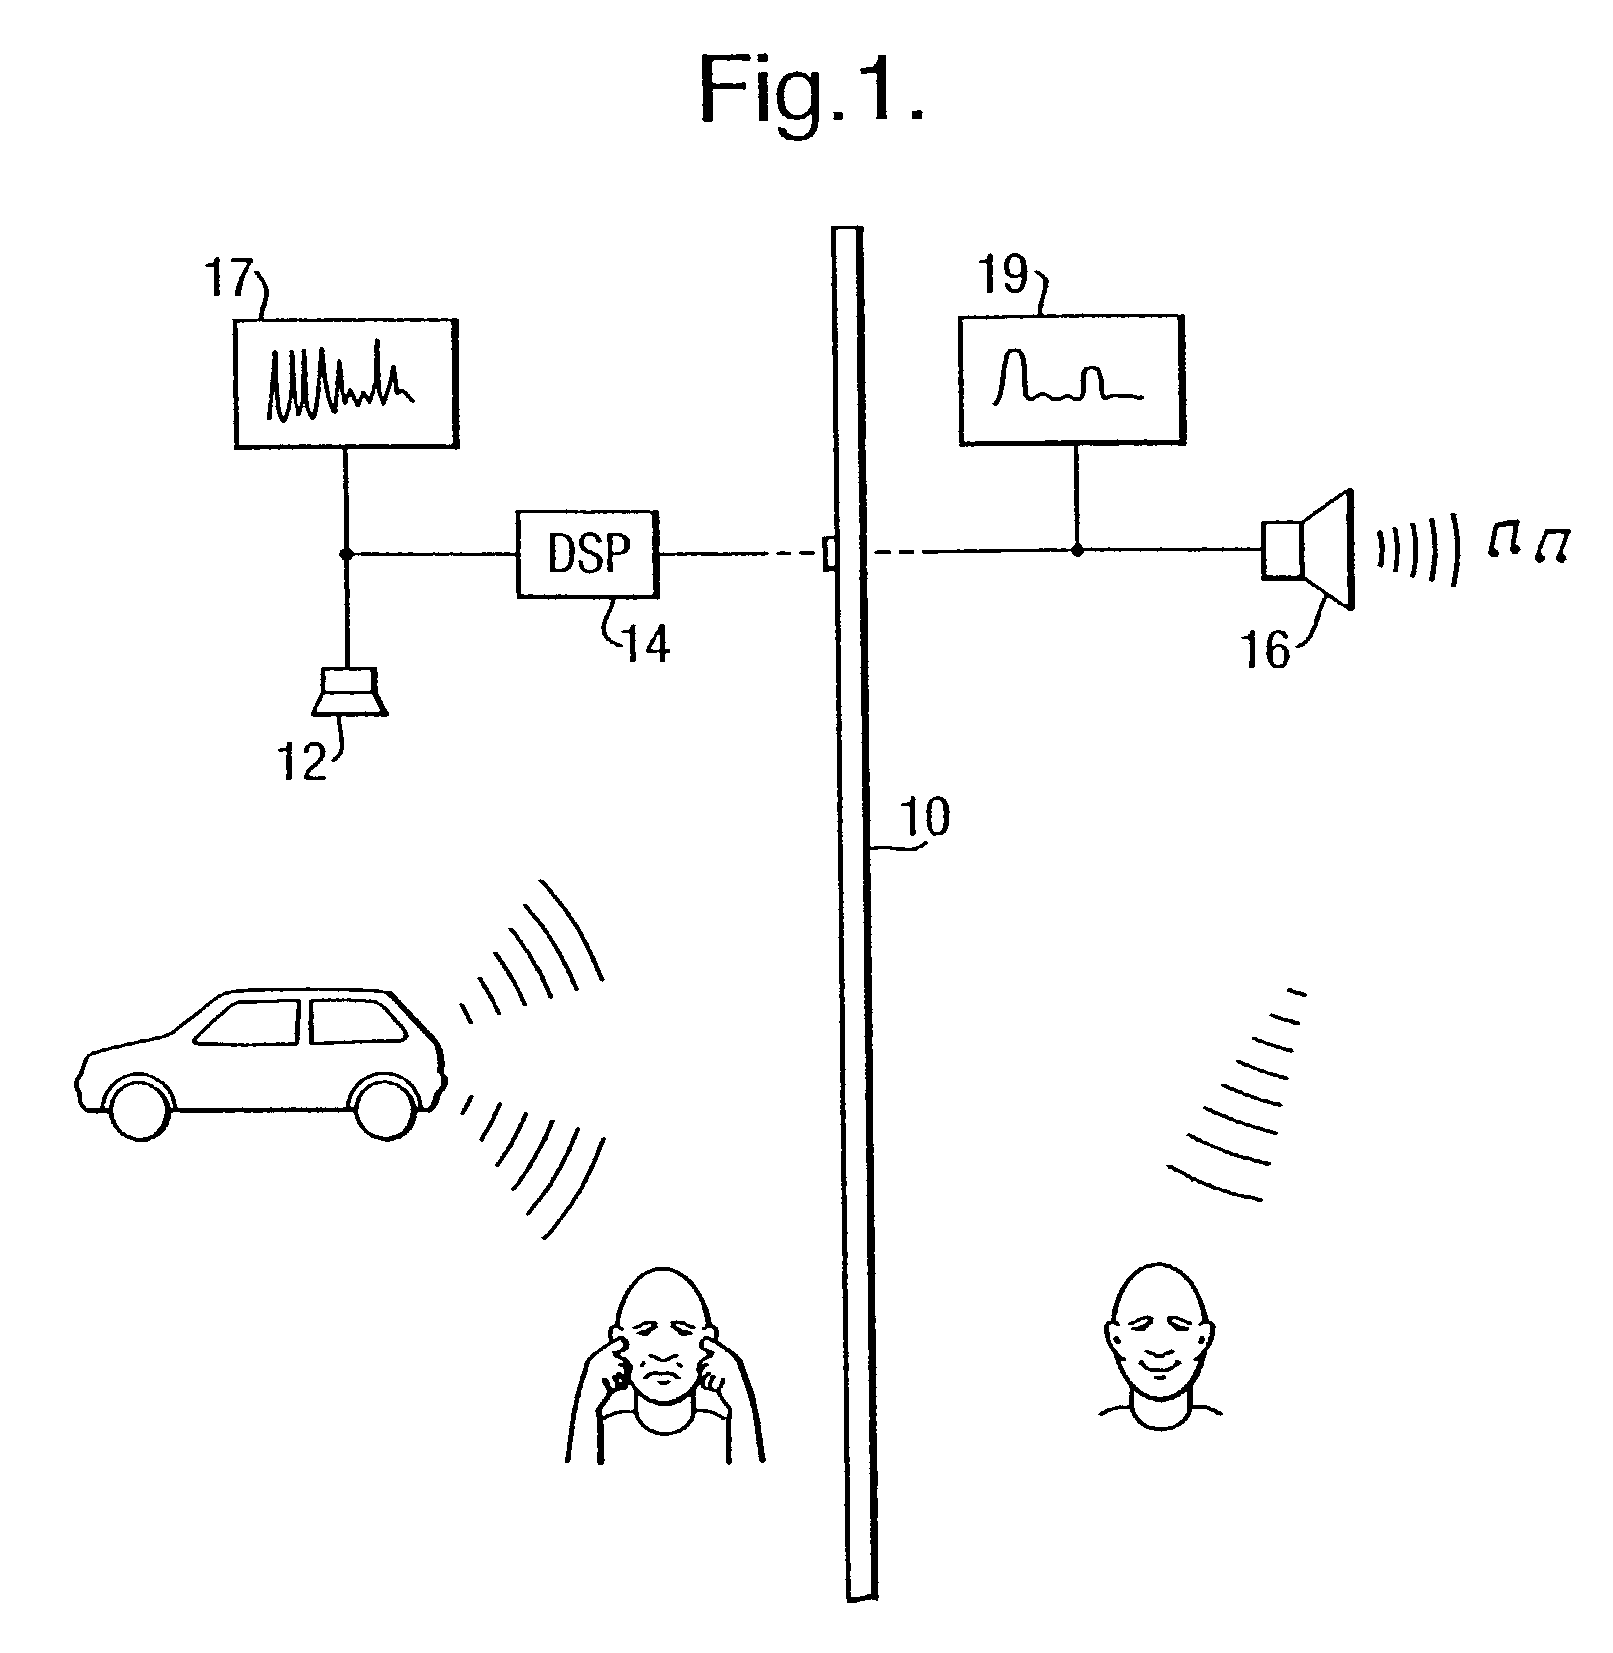 Apparatus for acoustically improving an environment